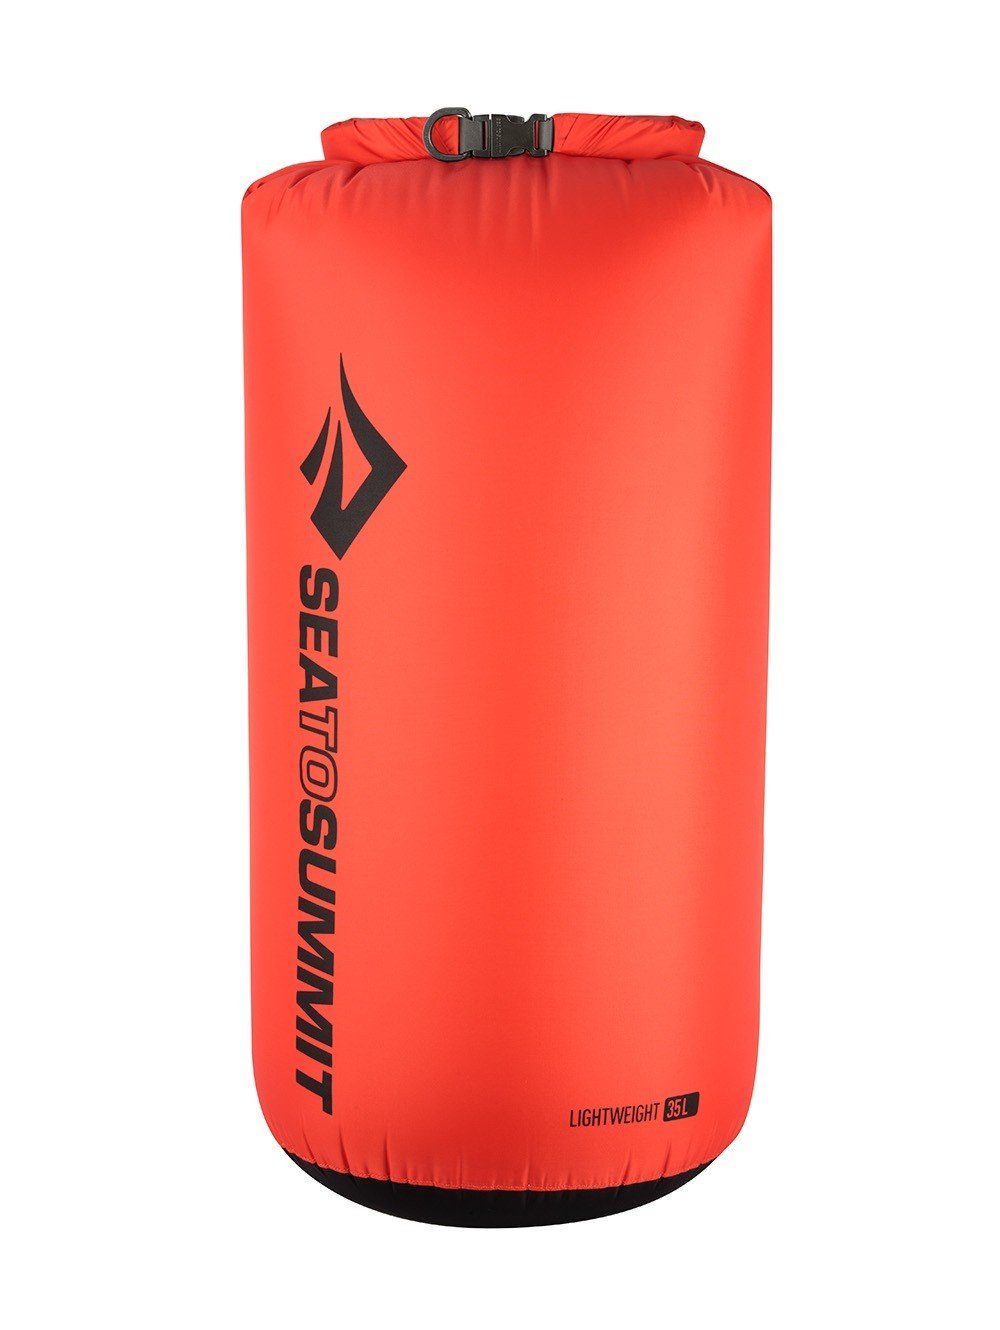 Sea To Summit Lightweight 70D 35 Litres Dry Sack Bags, Packs and Cases Sea To Summit Red Tactical Gear Supplier Tactical Distributors Australia